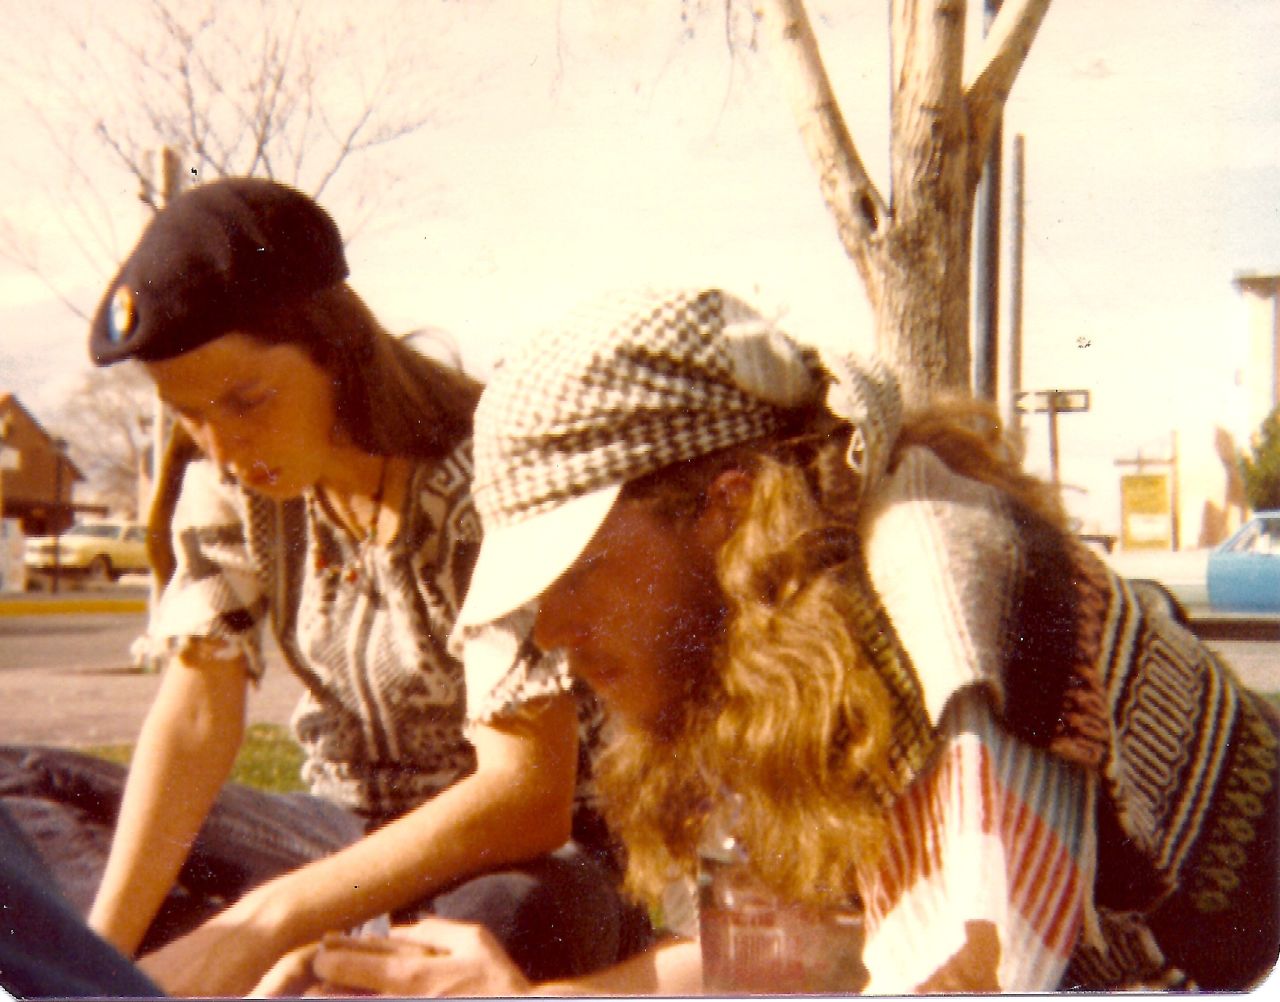 "Some called me and my friends granolas. Some called us hippies. We didn't care what we were called as long as no one told us what we should do," said Hilary Ohm, left. She was 24 years old in 1982 and very active in the anti-nuclear-power movement.